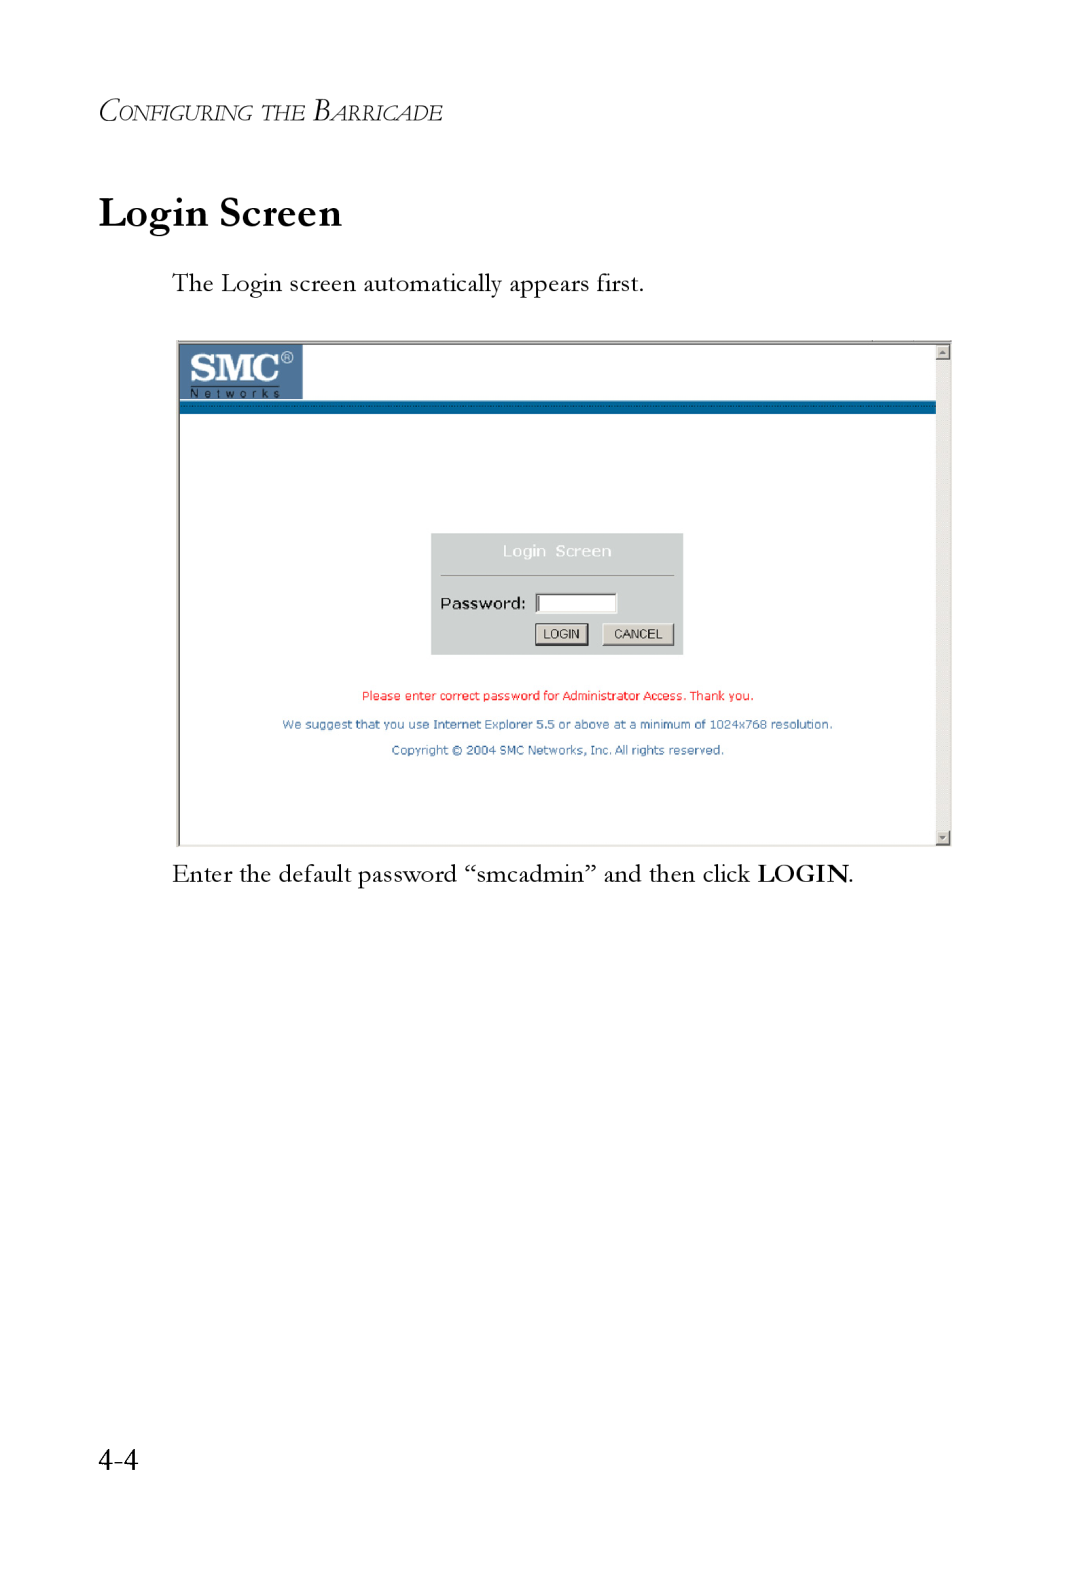 SMC Networks SMCWBR14T-G manual Login Screen, The Login screen automatically appears first, Configuring The Barricade 